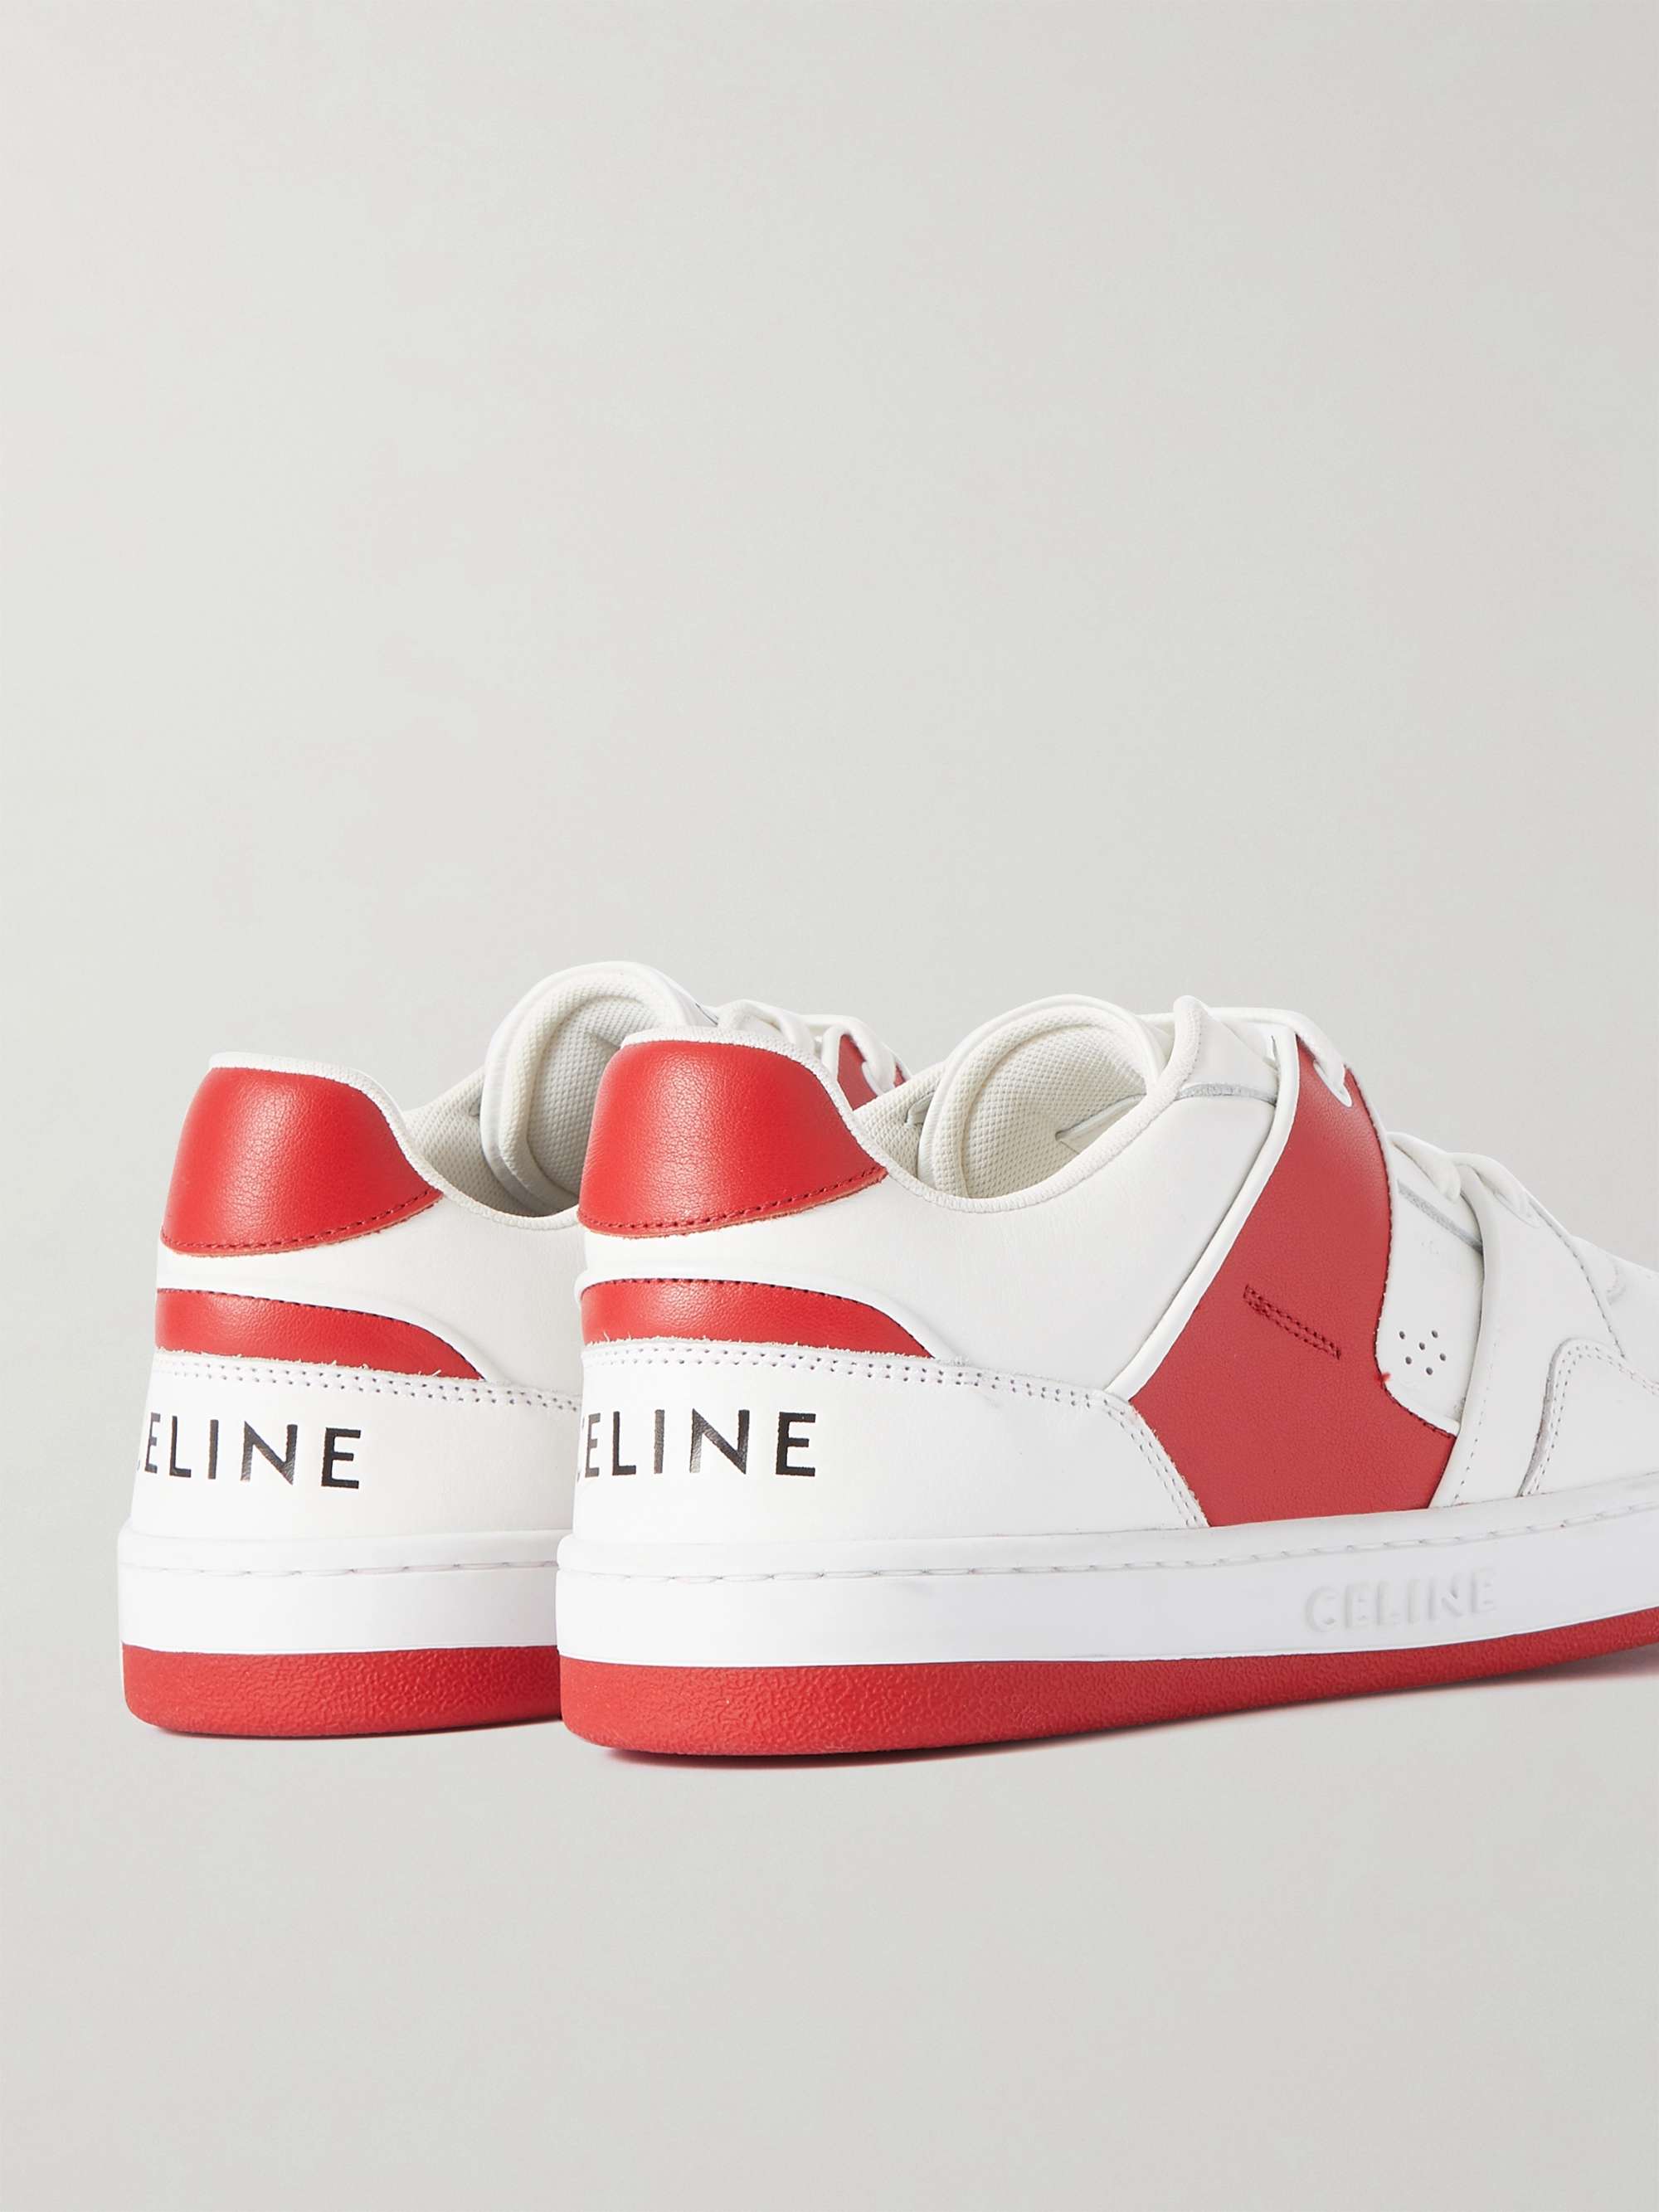 CELINE HOMME Two-Tone Leather Sneakers